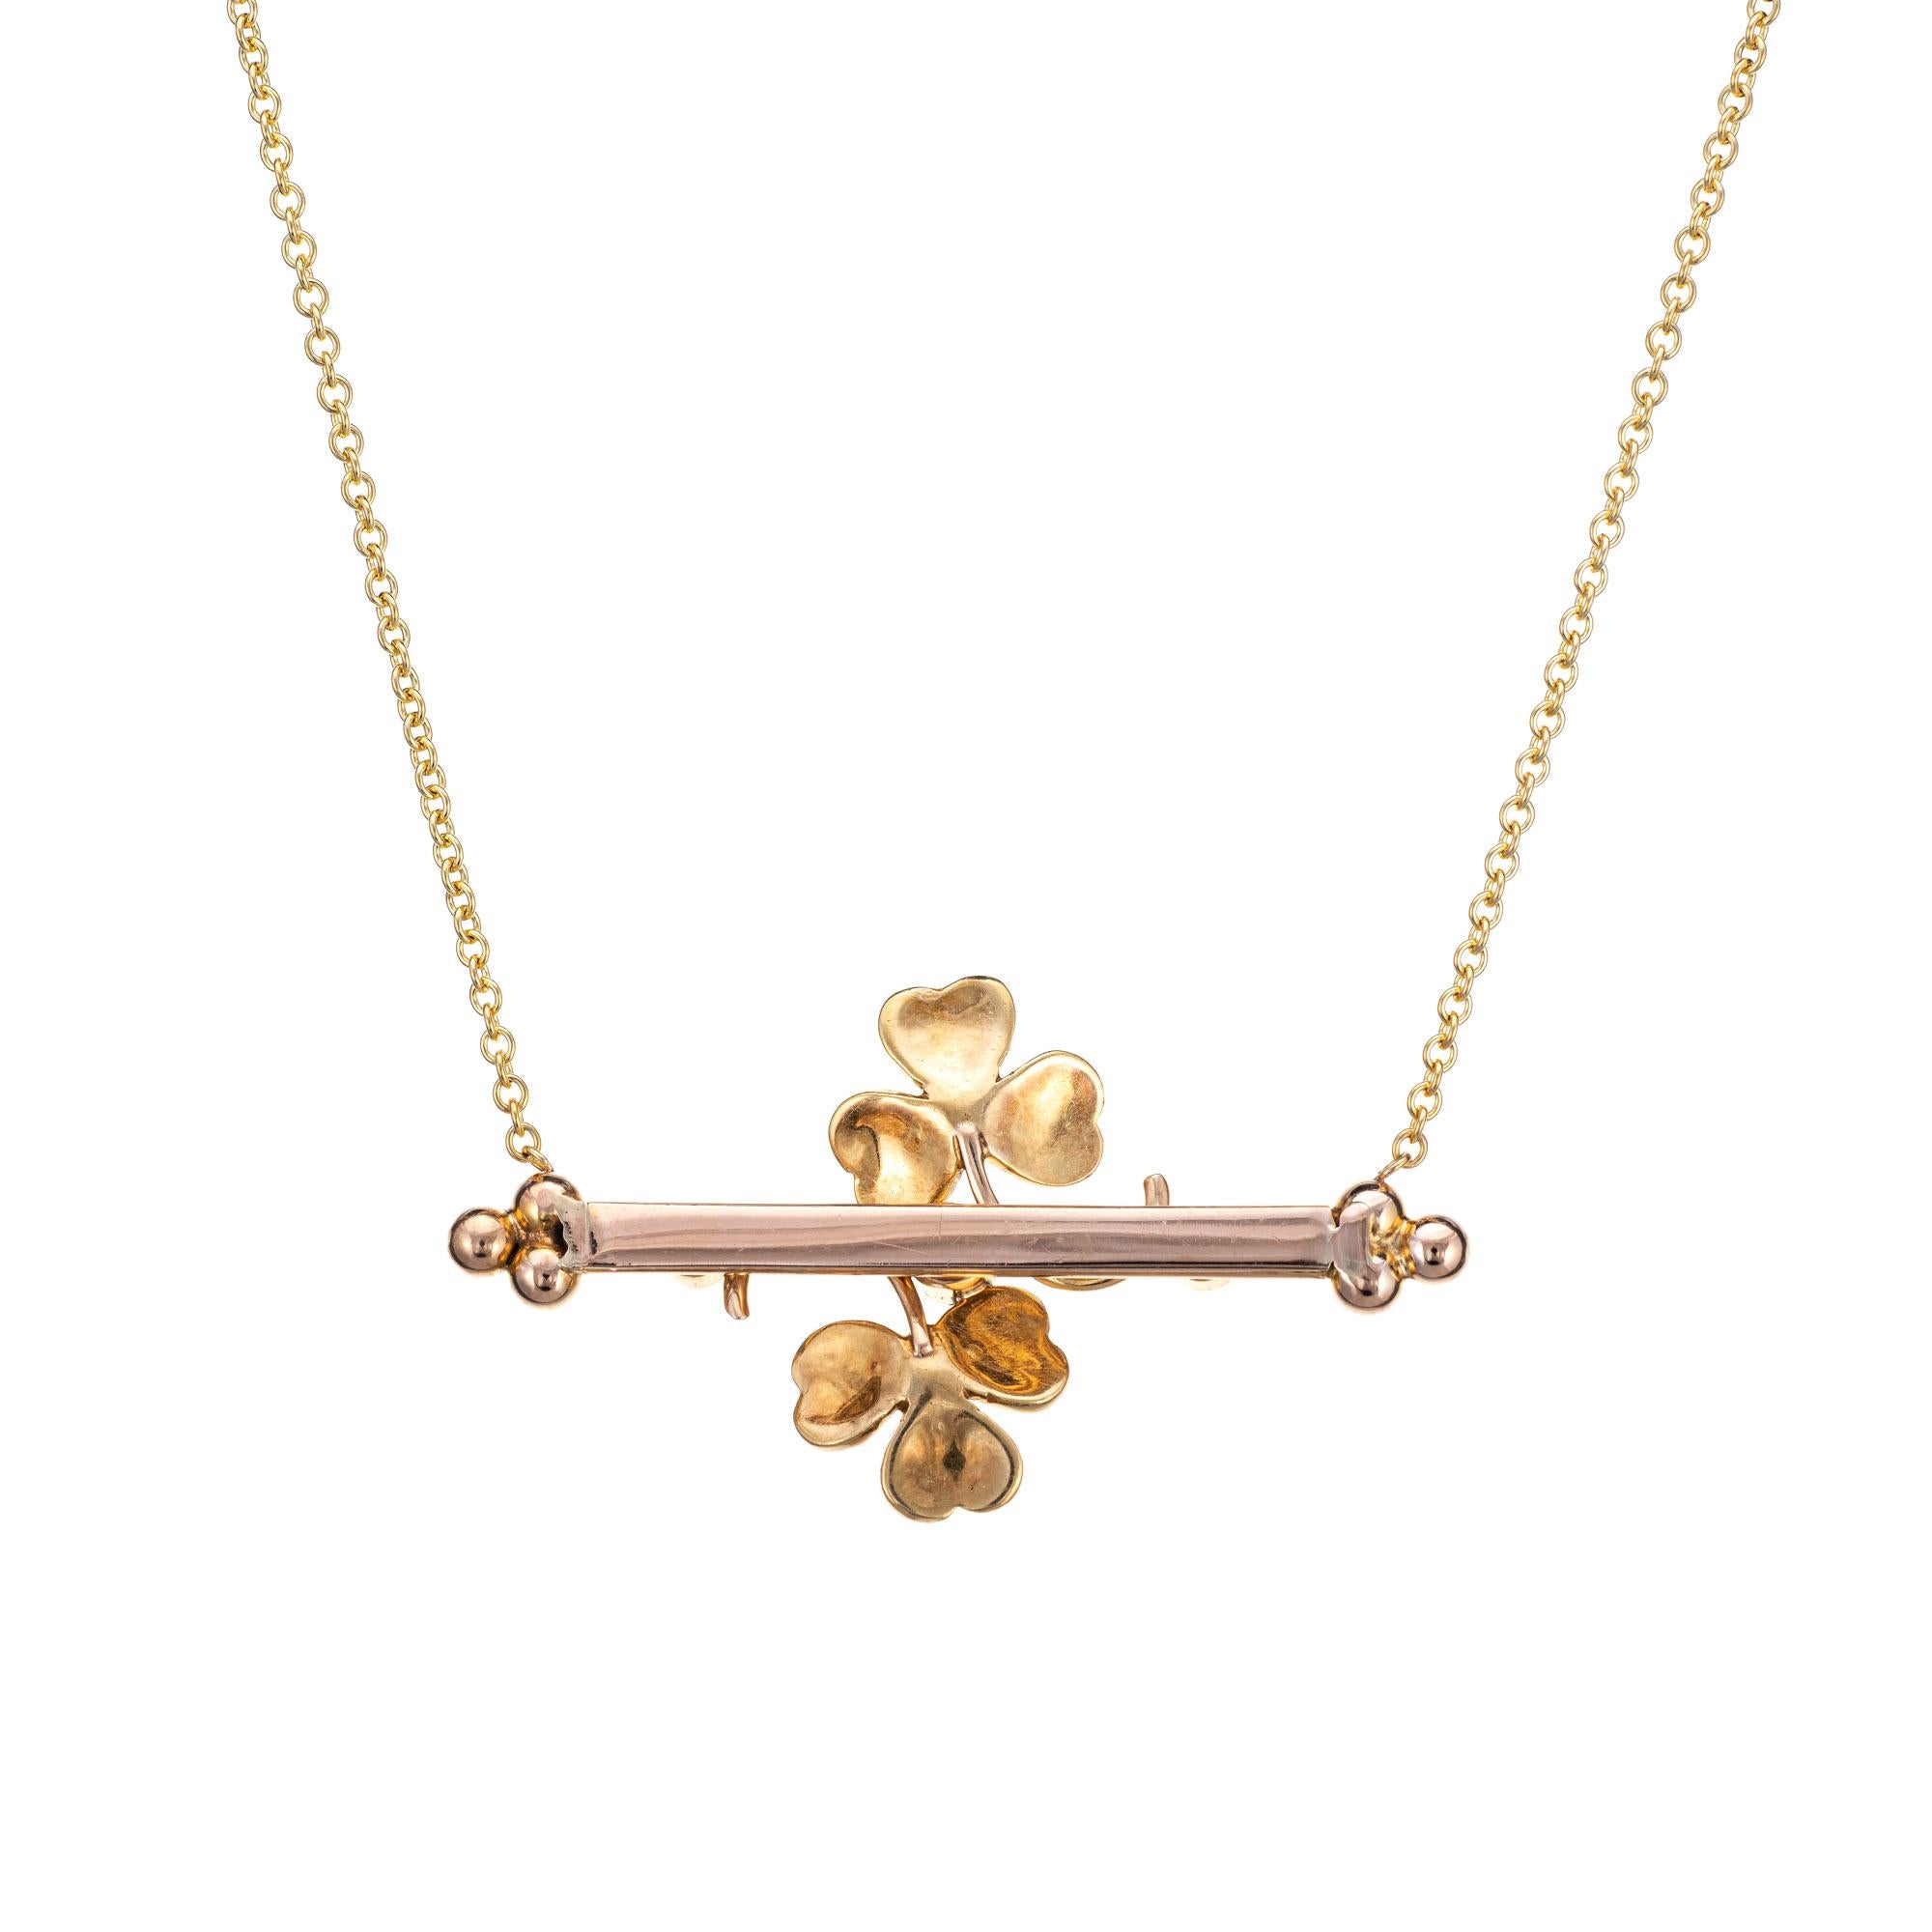 Originally an antique Victorian era brooch (circa 1880s to 1900s), the shamrock necklace is crafted in 14 karat yellow gold.

The brooch is mounted to a fine link 14k yellow gold chain. The beautifully detailed shamrock is set with seed pearls and